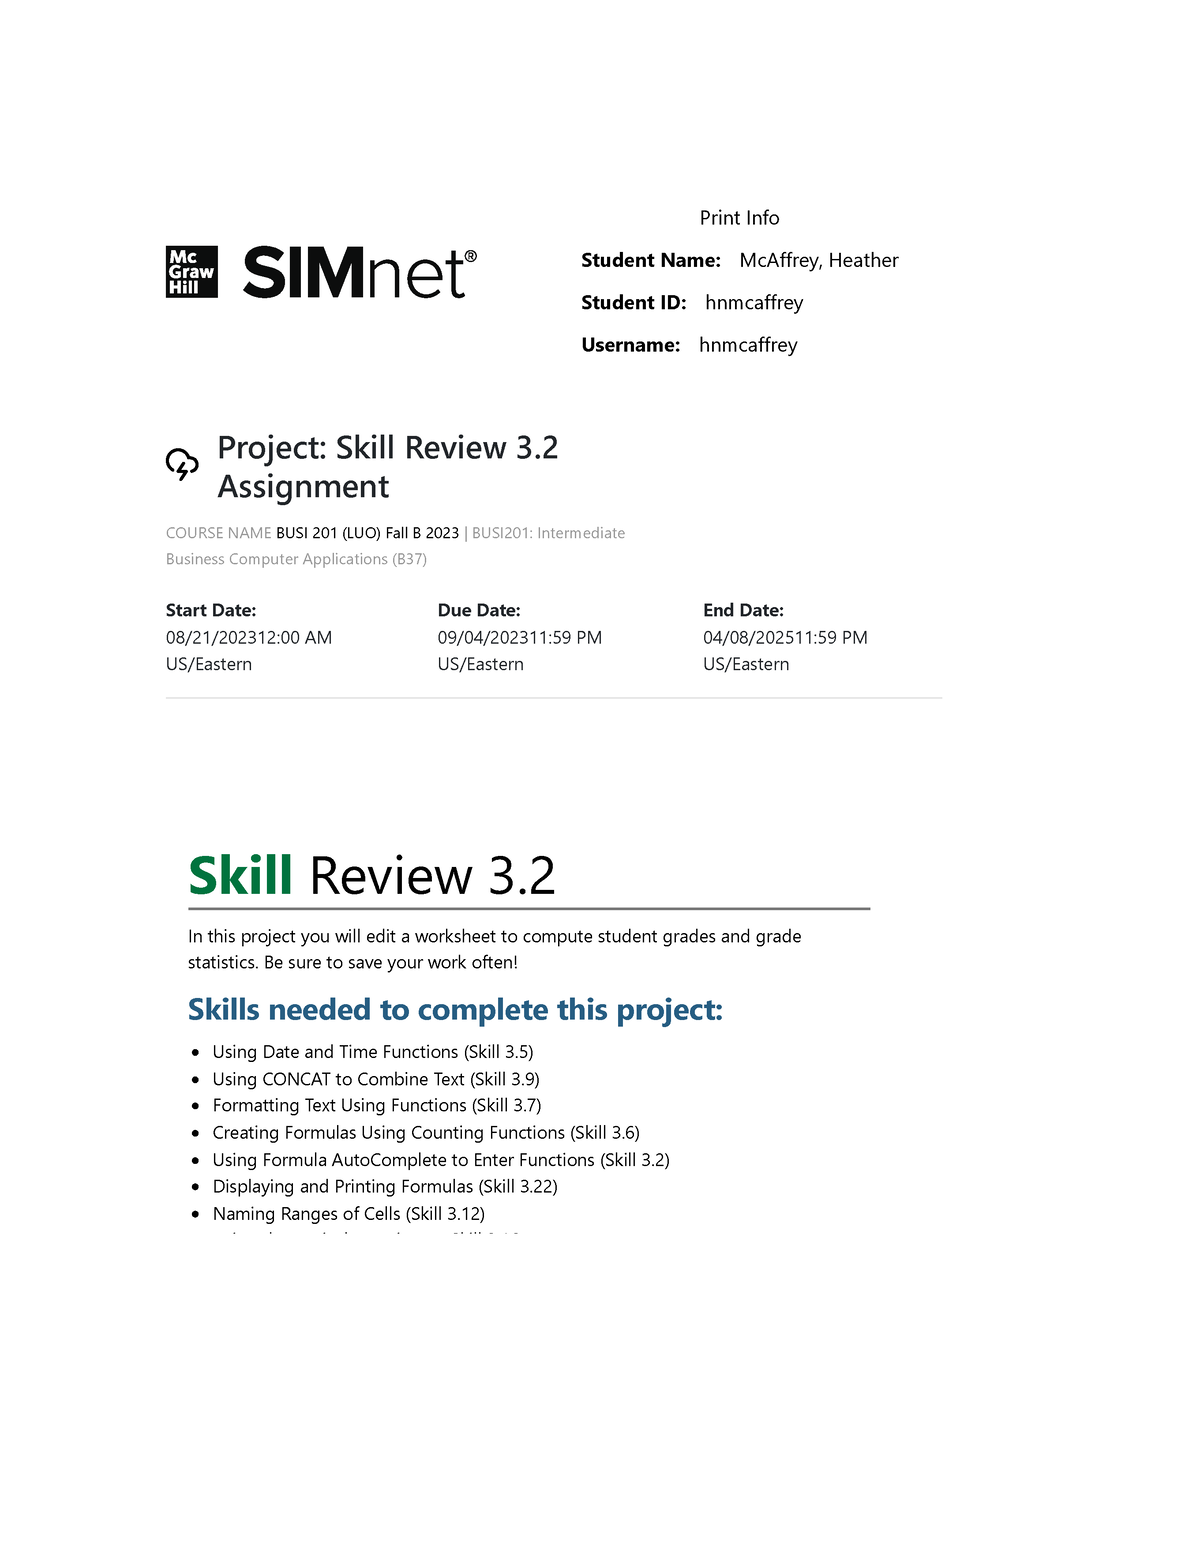 project skill review 3.2 assignment